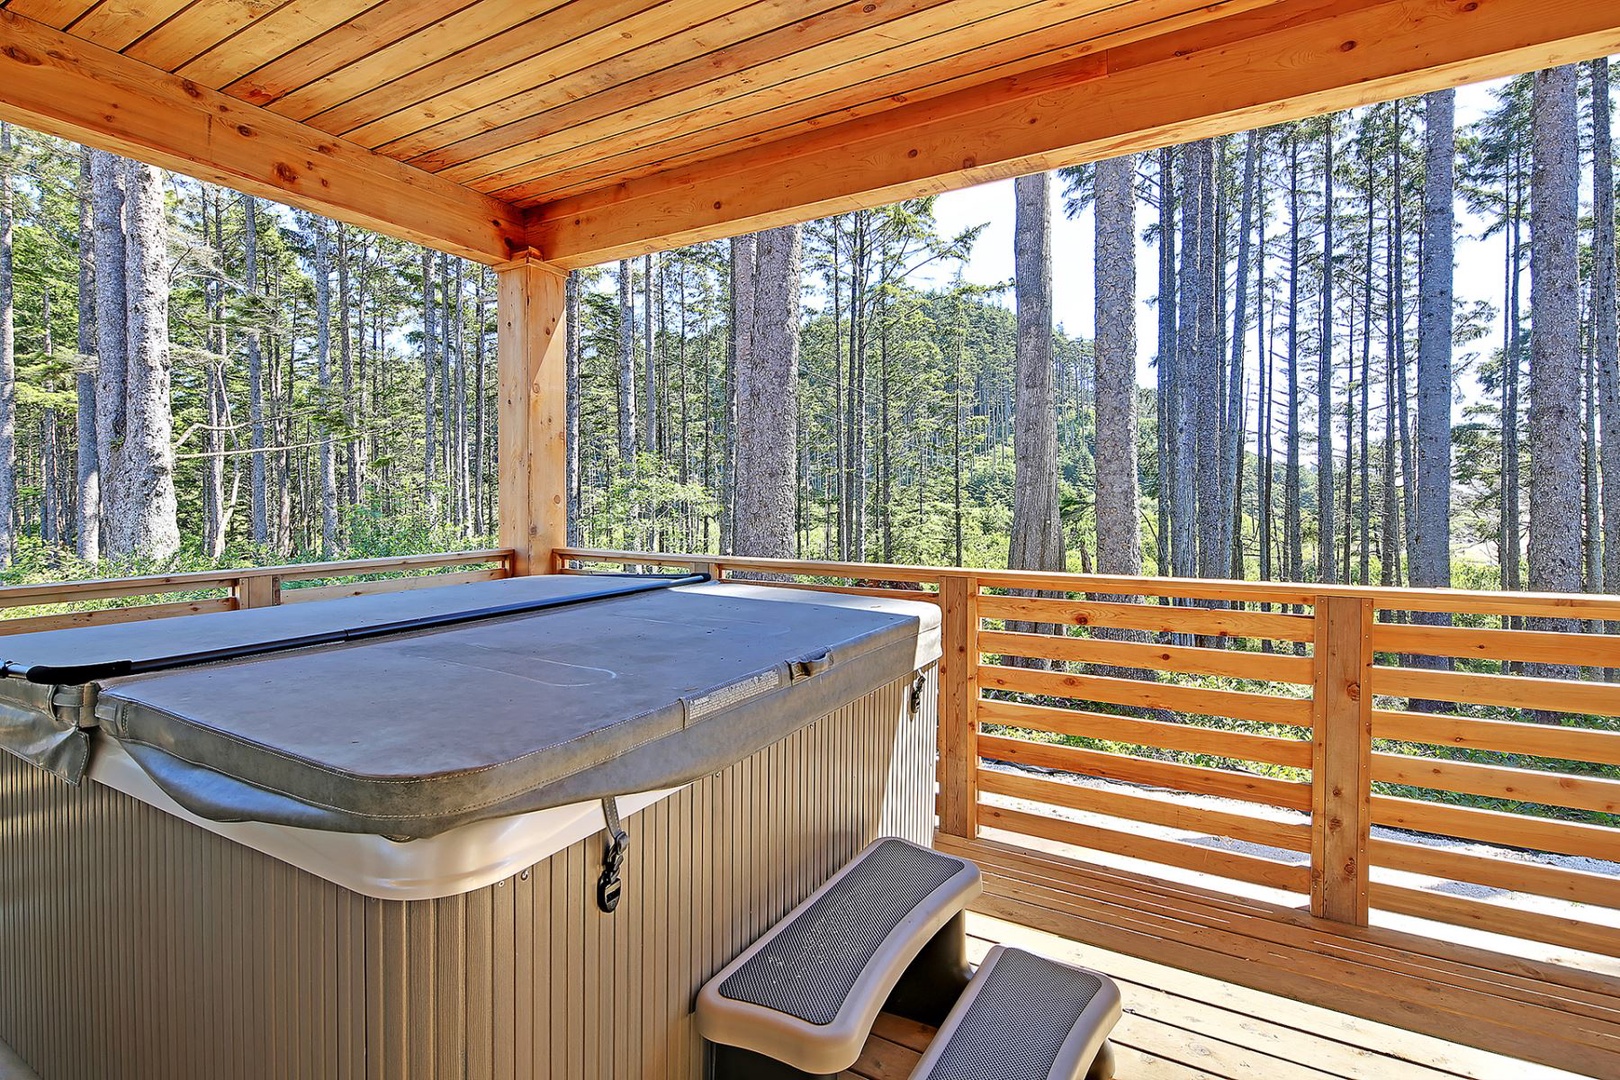 Covered deck with hot tub and ocean views